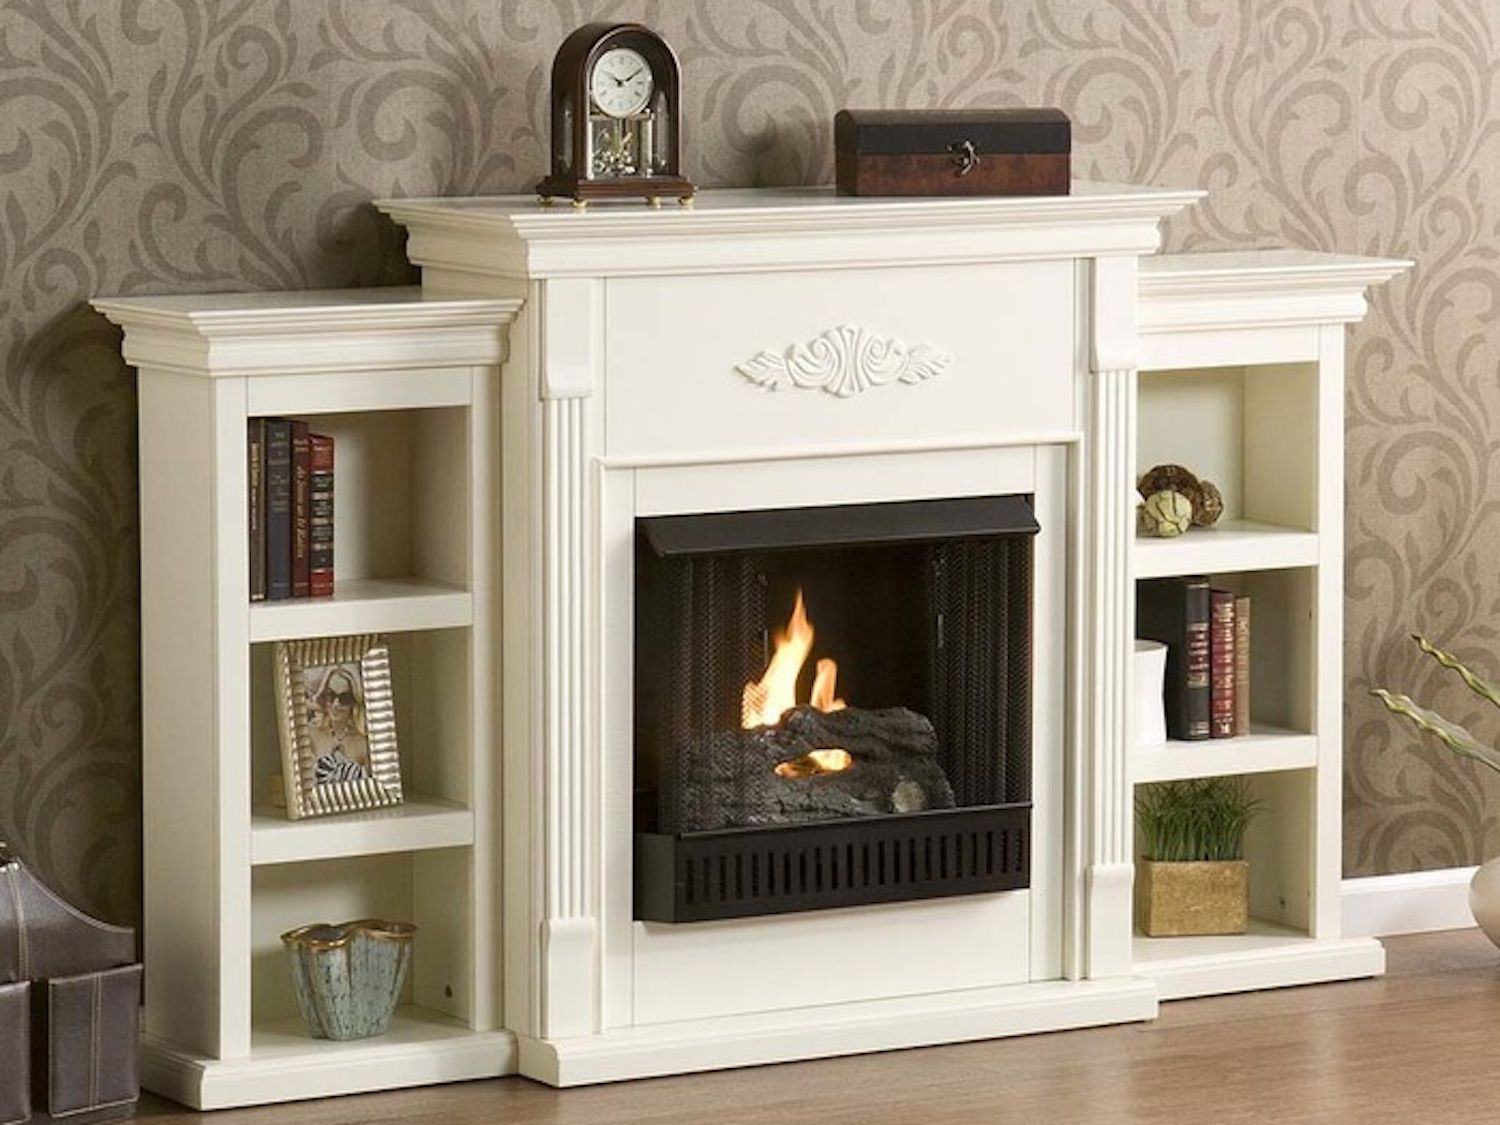 Pros and Cons Of Ventless Gas Fireplaces Awesome How to Use Gel Fuel Fireplaces Indoors or Outdoors